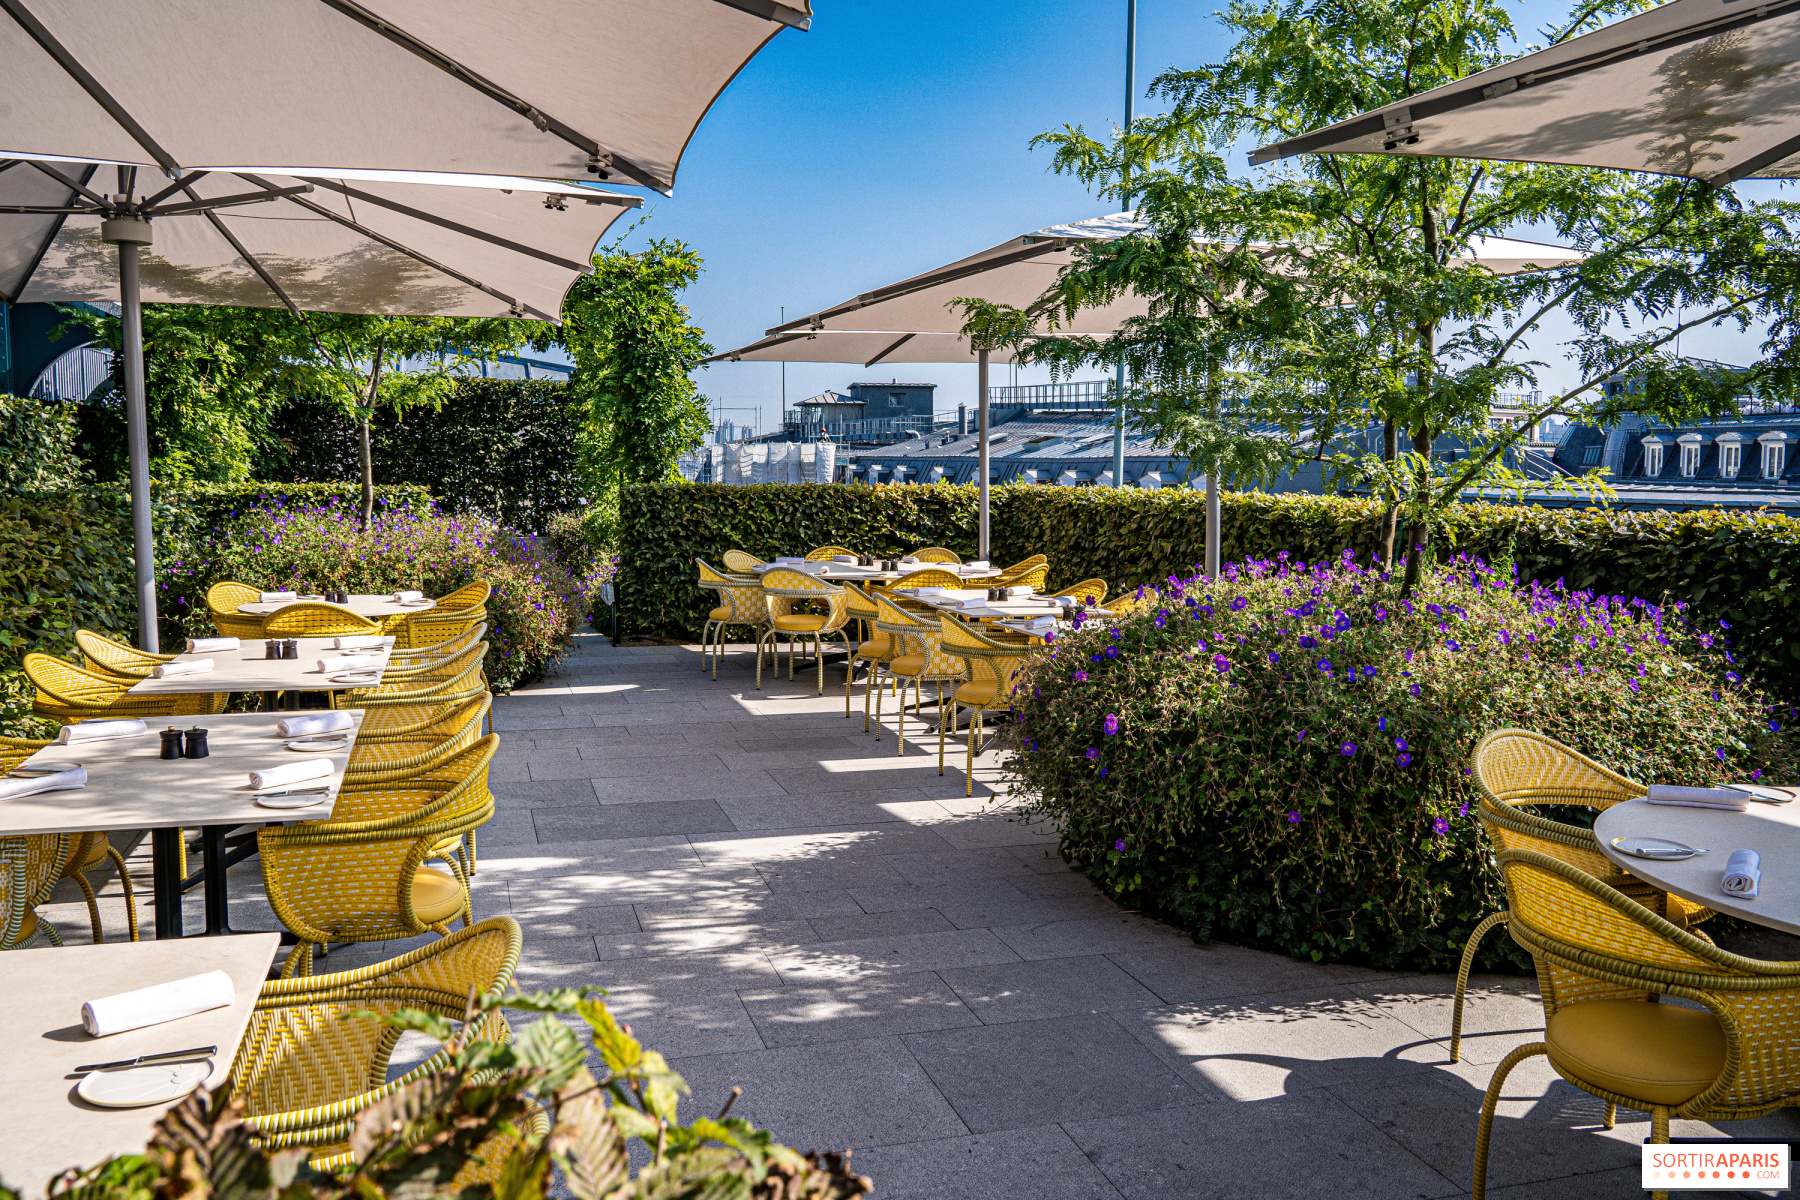 Four restaurants and bars at the heart of Paris │ Cheval Blanc Paris Hotel